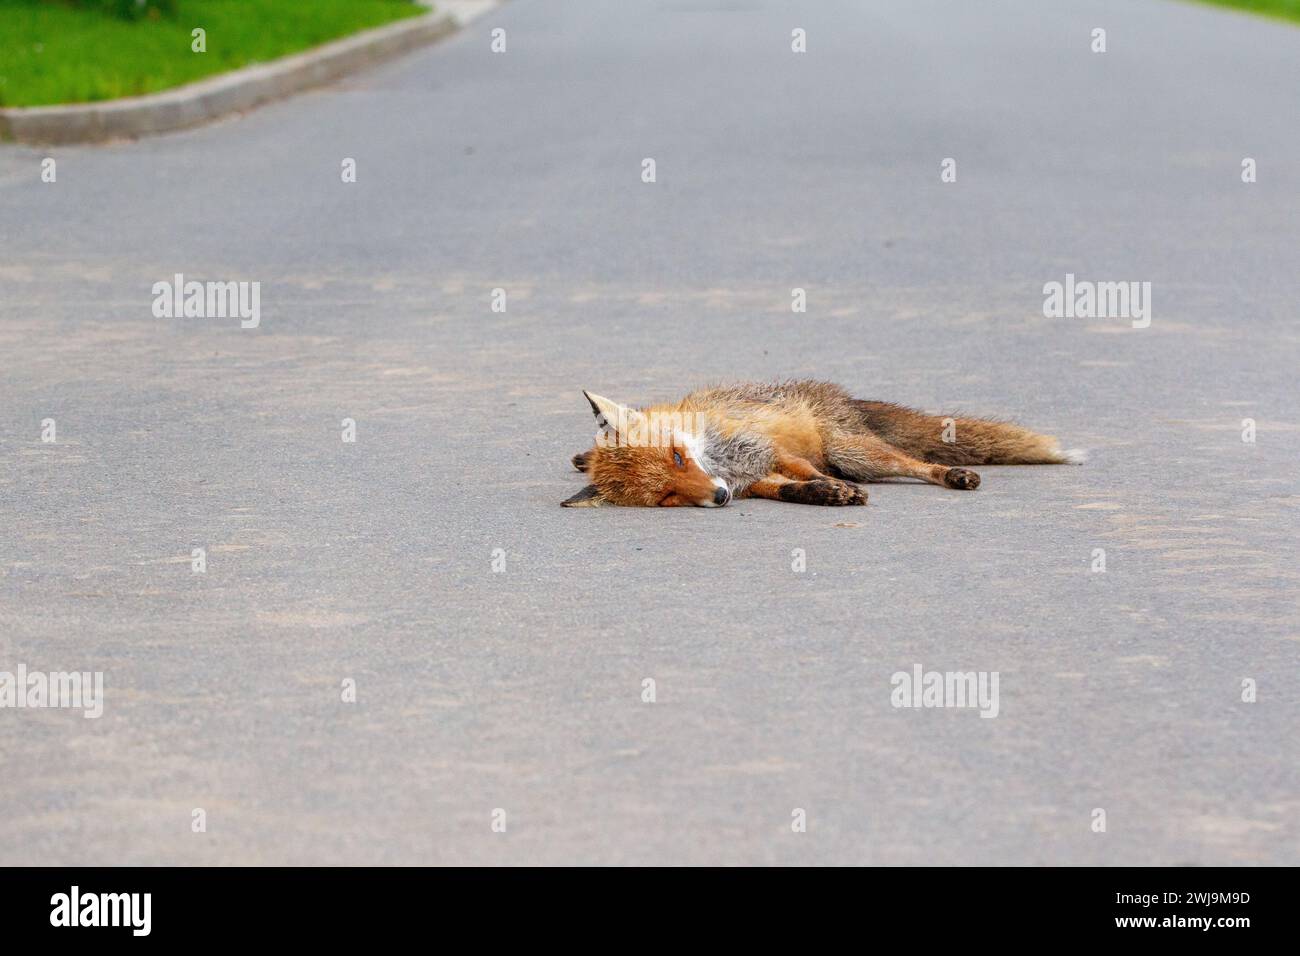 Red fox (Vulpes vulpes) dearh on the road Stock Photo